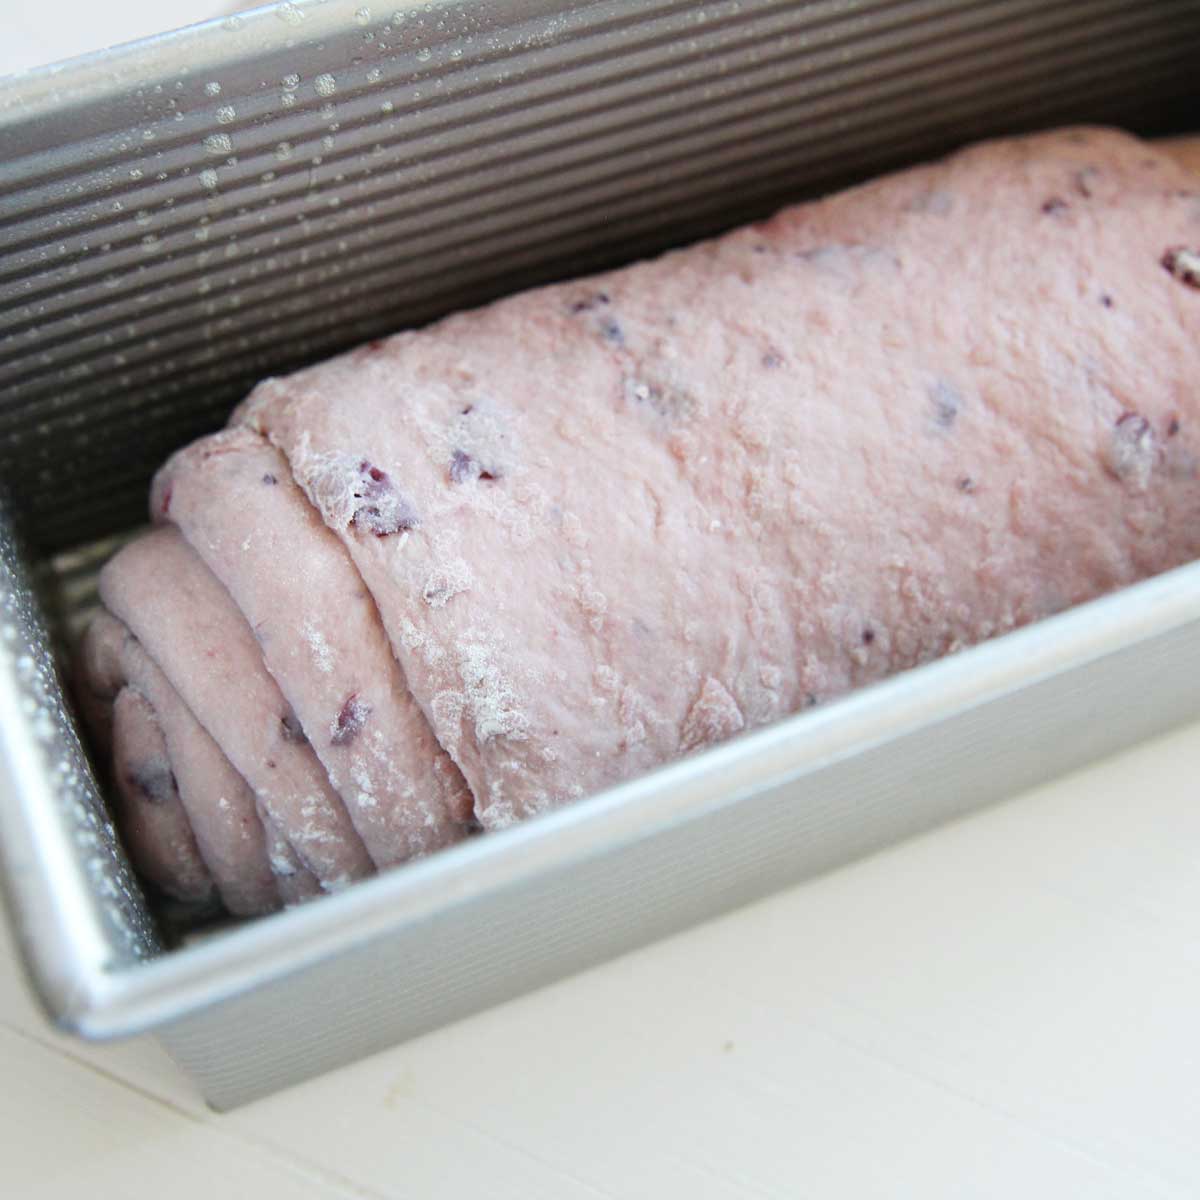 Cranberry Yeast Bread Loaf (An Easy, Vegan Recipe w/ Canned Cranberry Sauce) - cranberry yeast bread